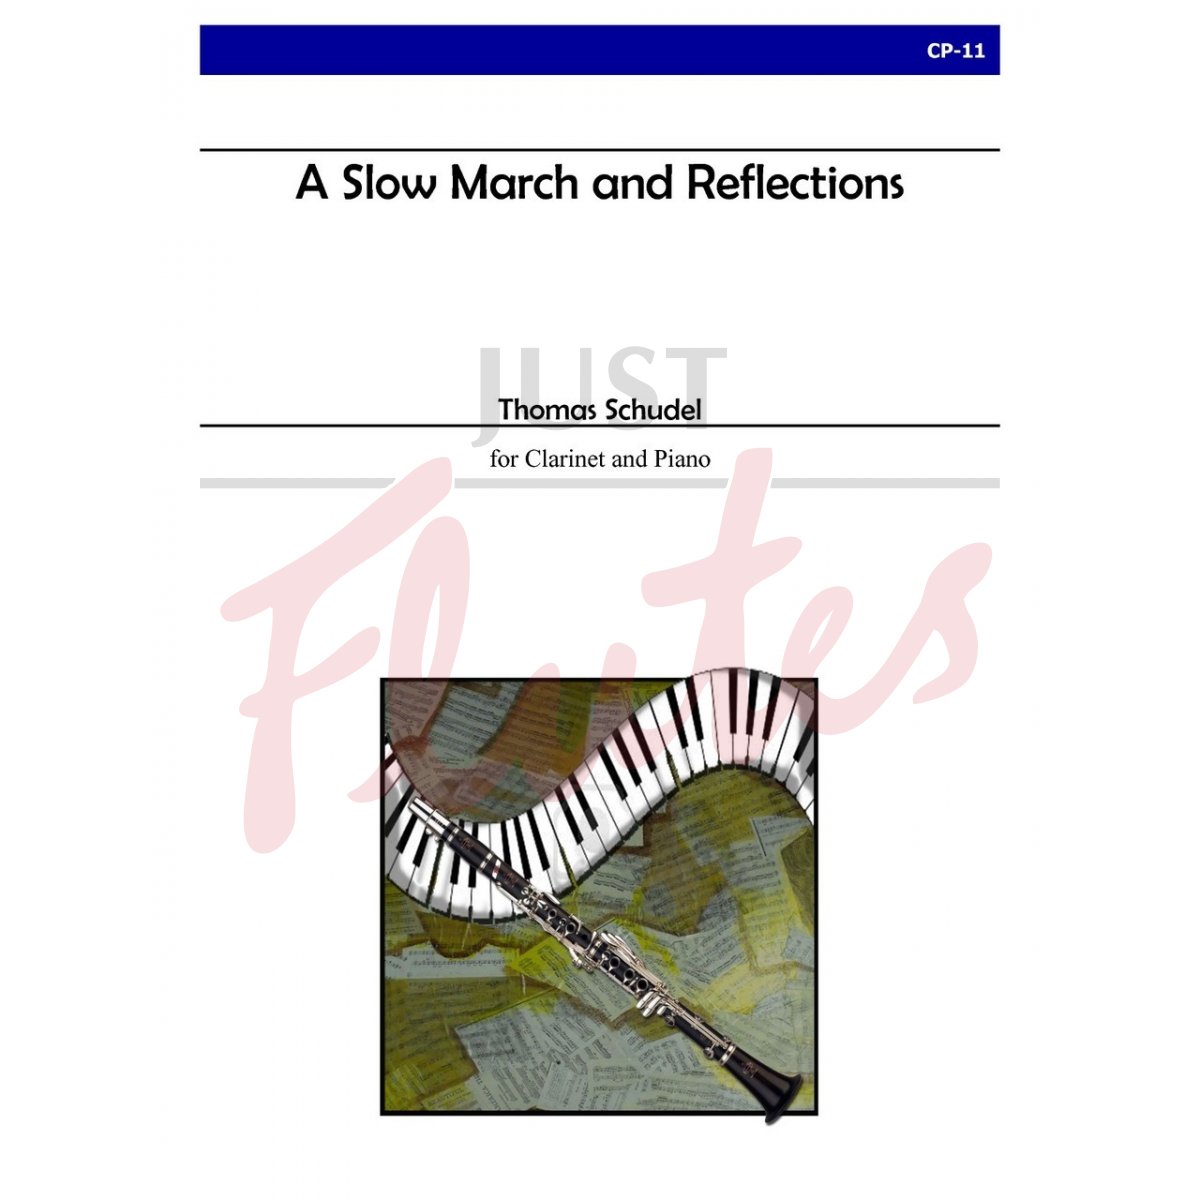 A Slow March and Reflections